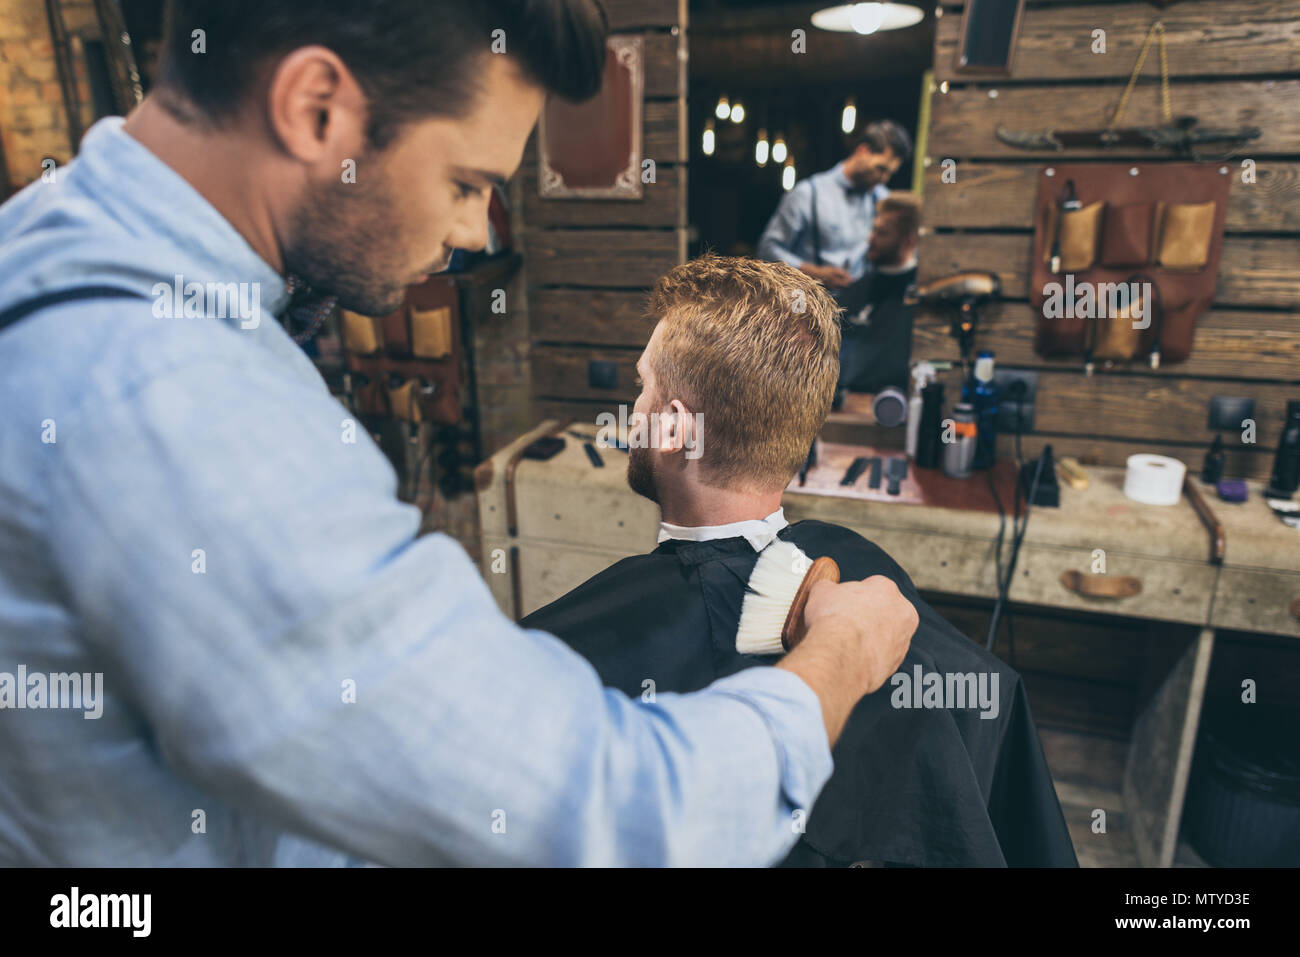 Handsome bearded man is getting hairstyle by hairdresser at barber shop Stock Photo